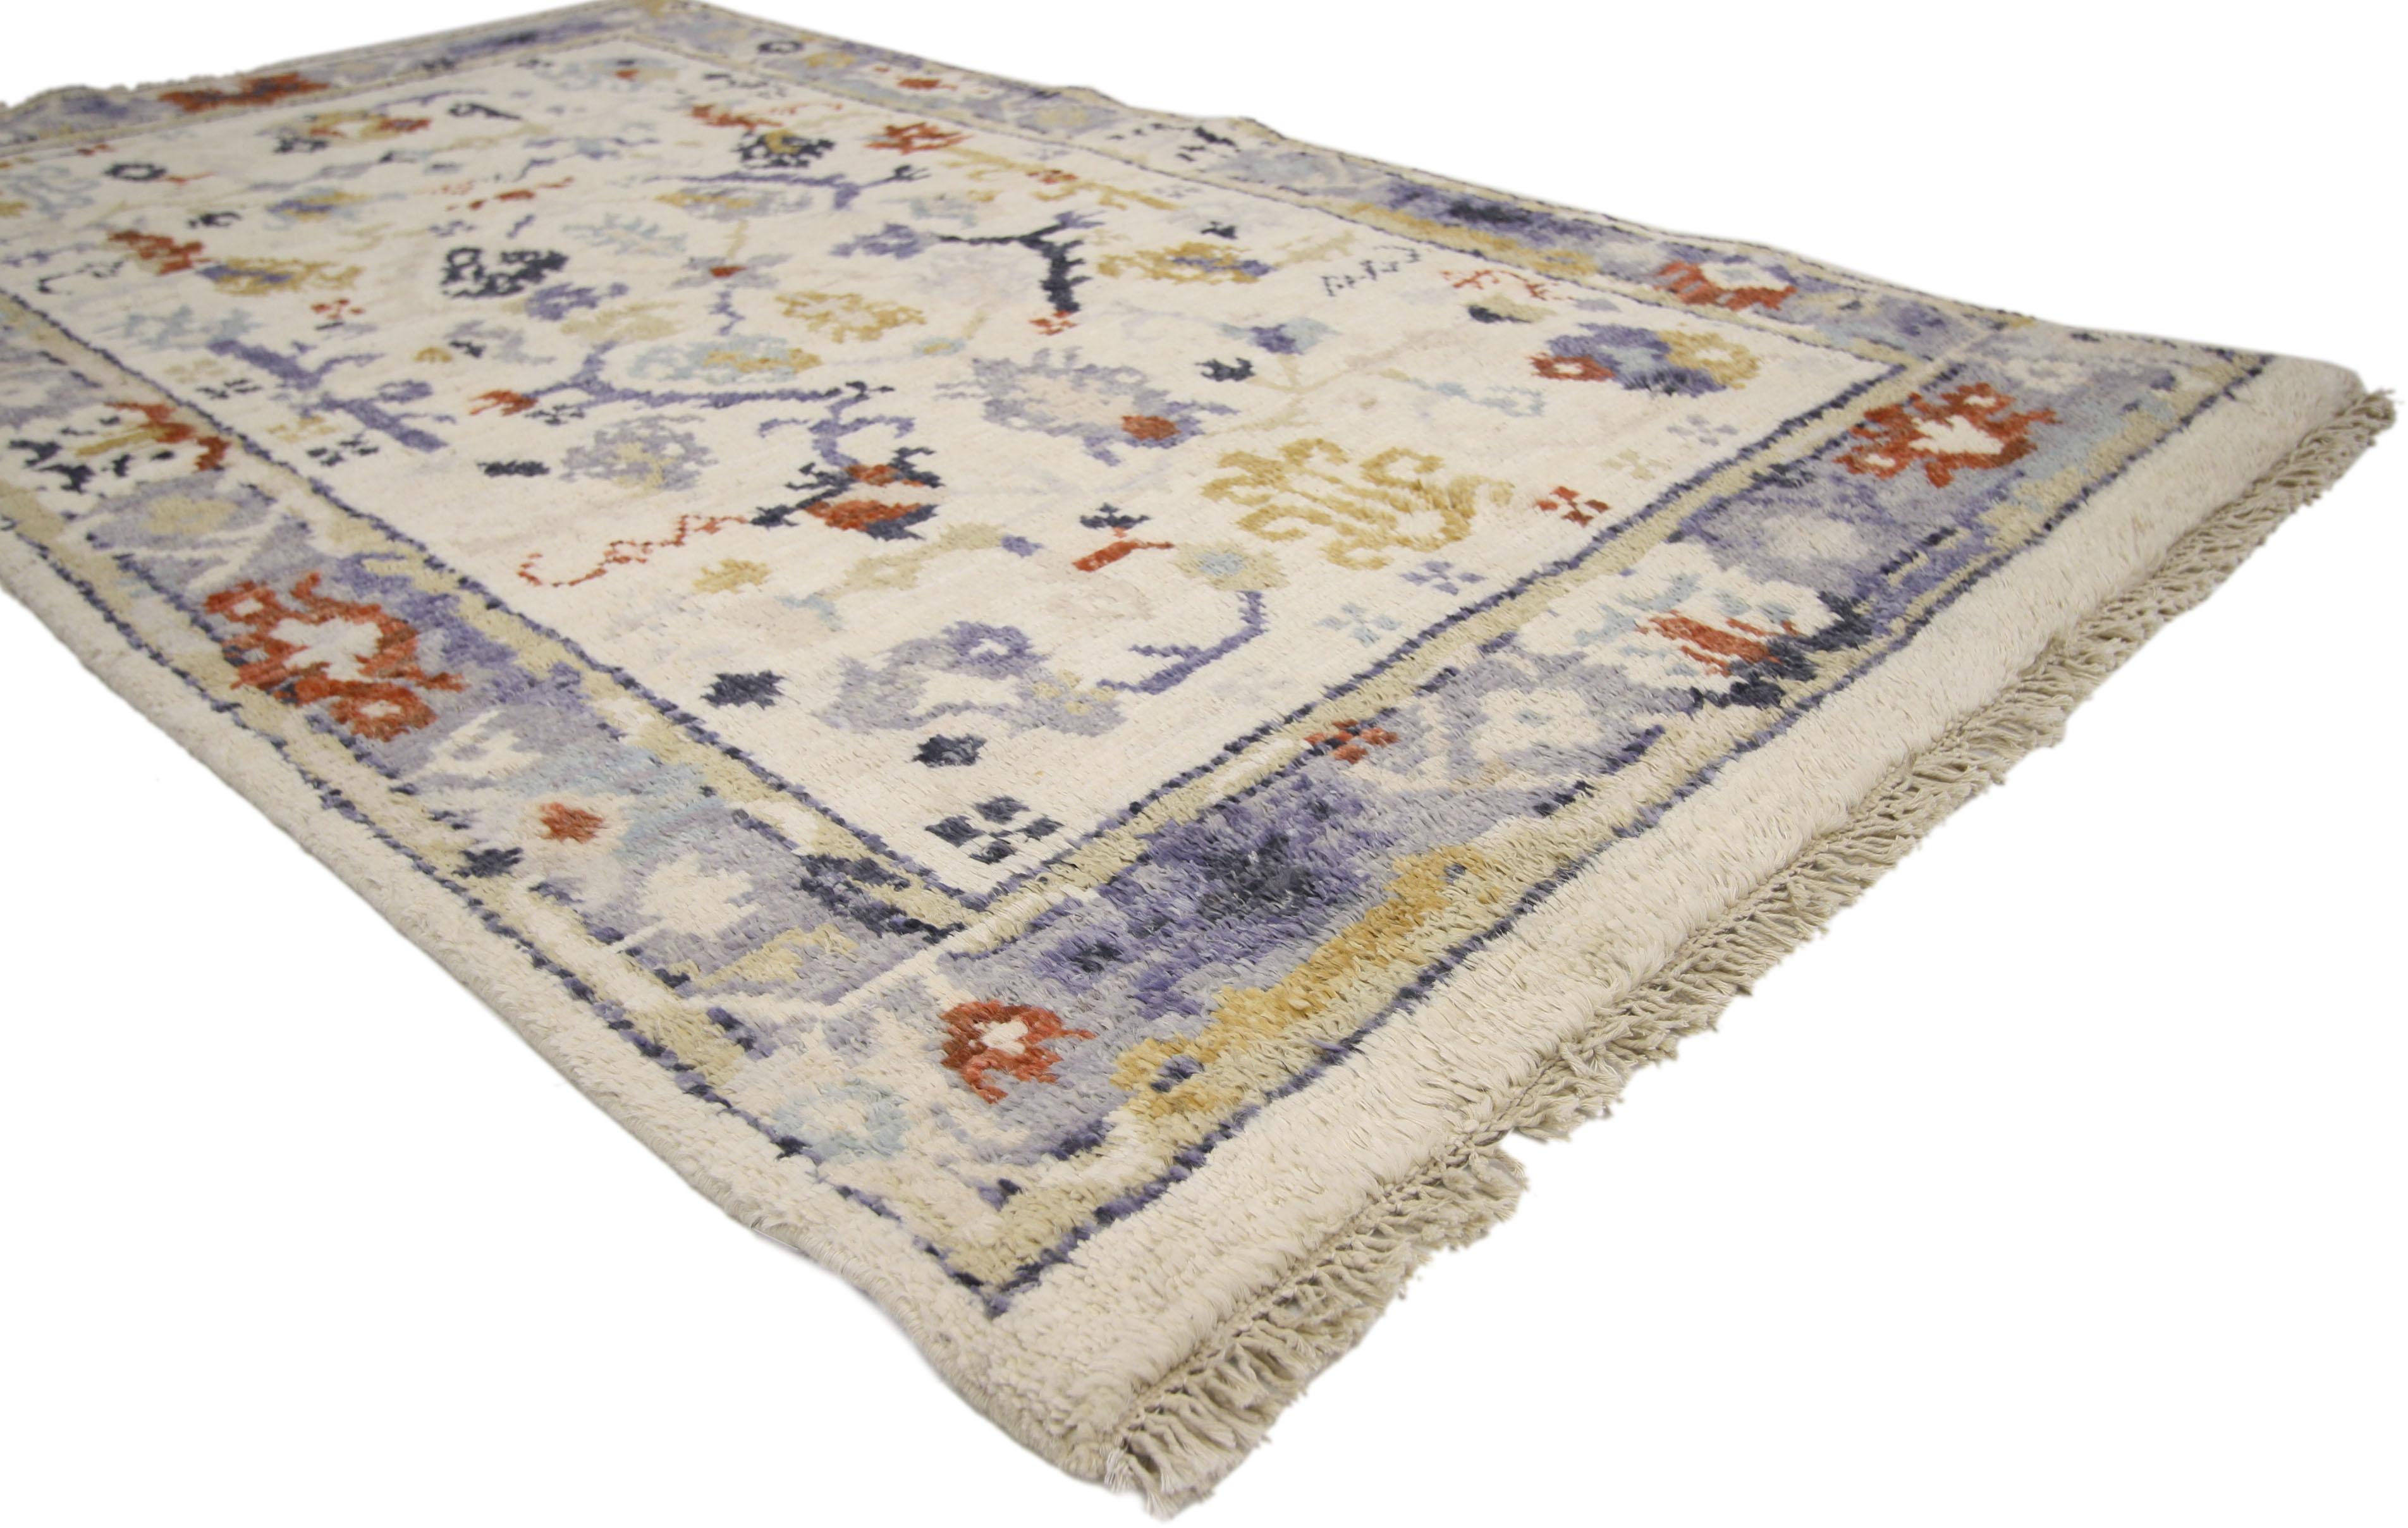 80388 Contemporary Transitional Oushak Accent Rug with Federal Style. Blending a Federal style and elements from the modern world, this hand knotted wool contemporary transitional Oushak accent rug beautifully balances new and old. It features an